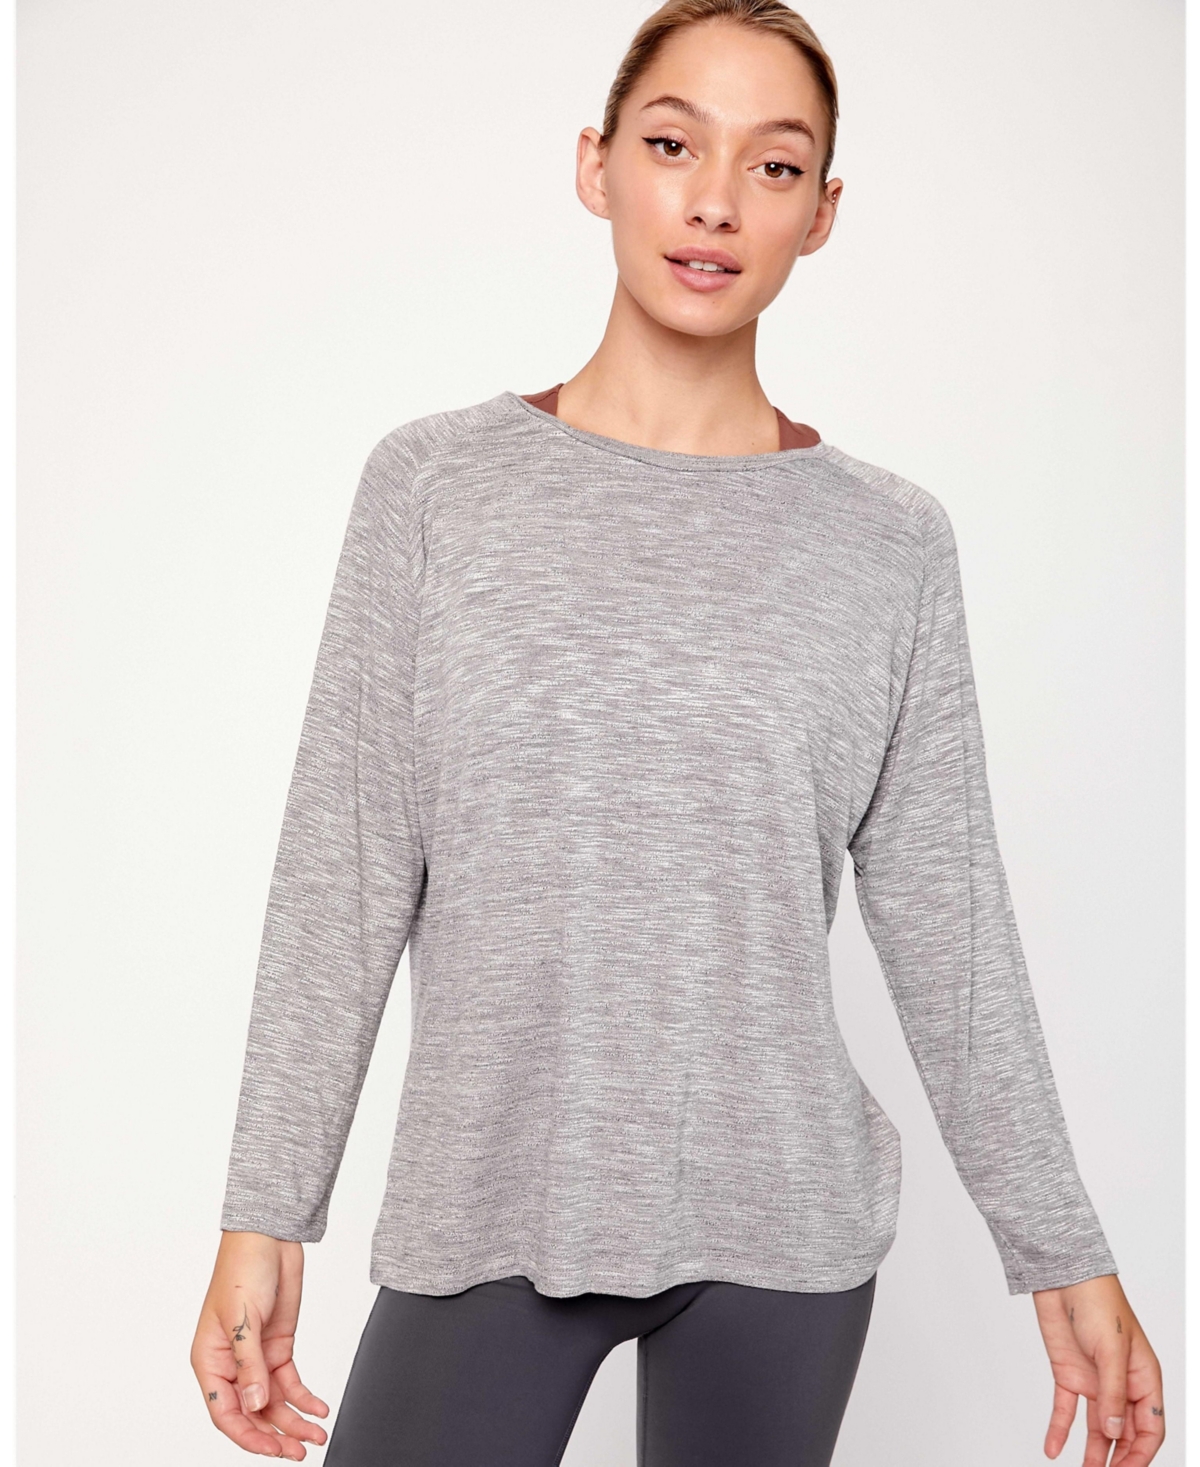 Women's Kim Heathered Pullover Top for Women - Heather Grey